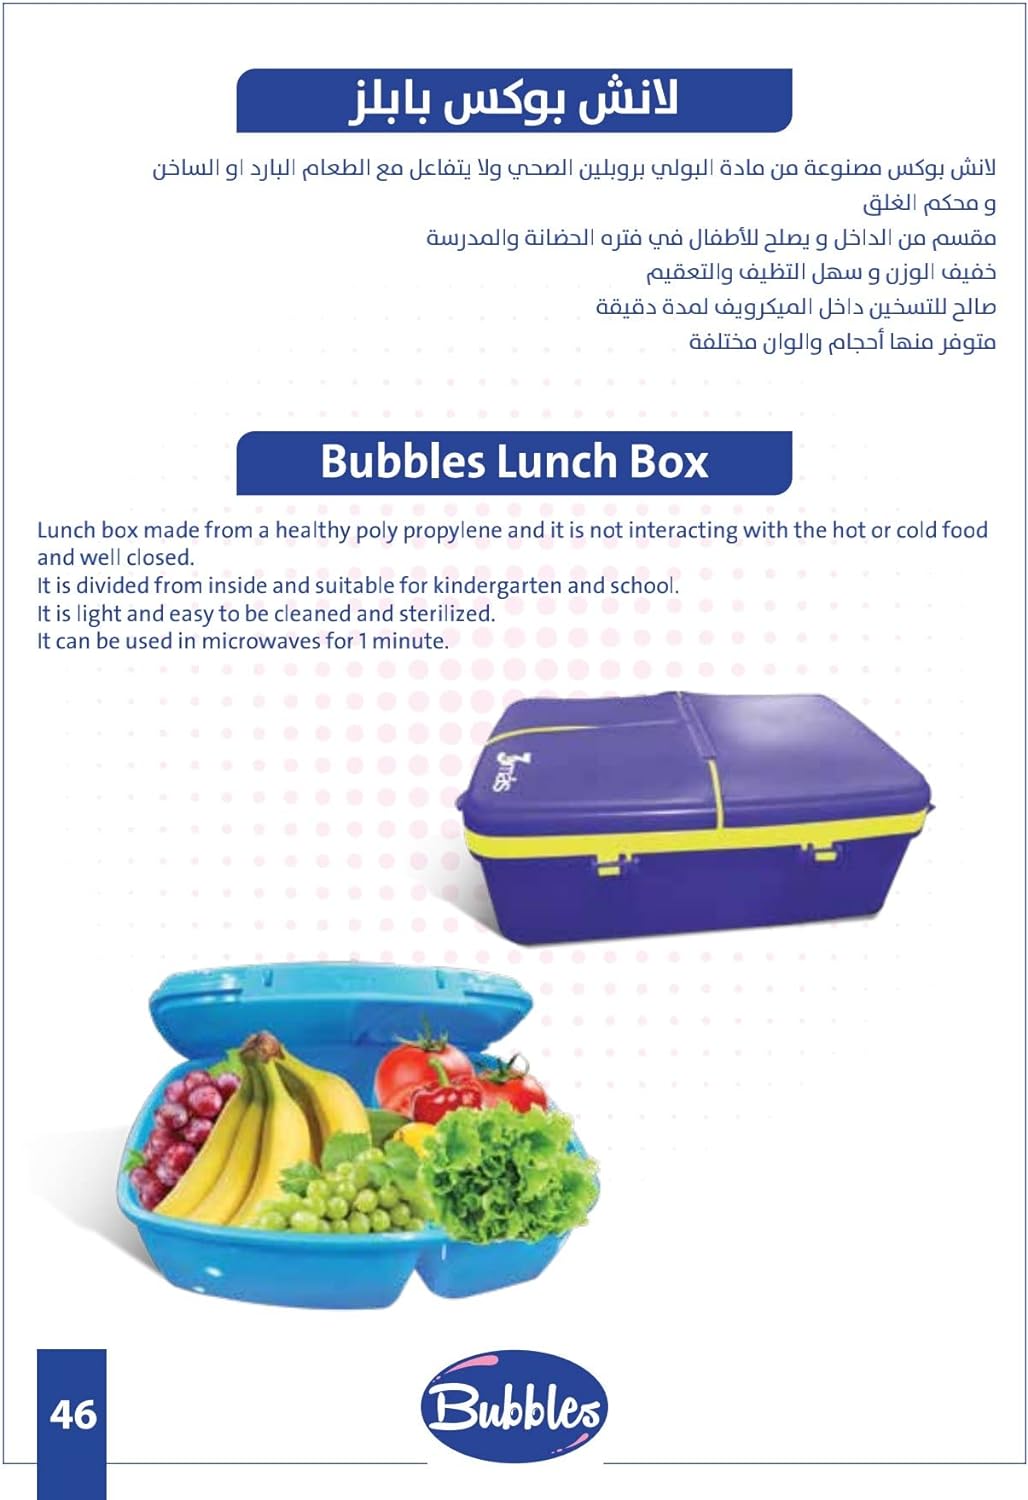 Bubbles lunch box magic for children - Red and yellow